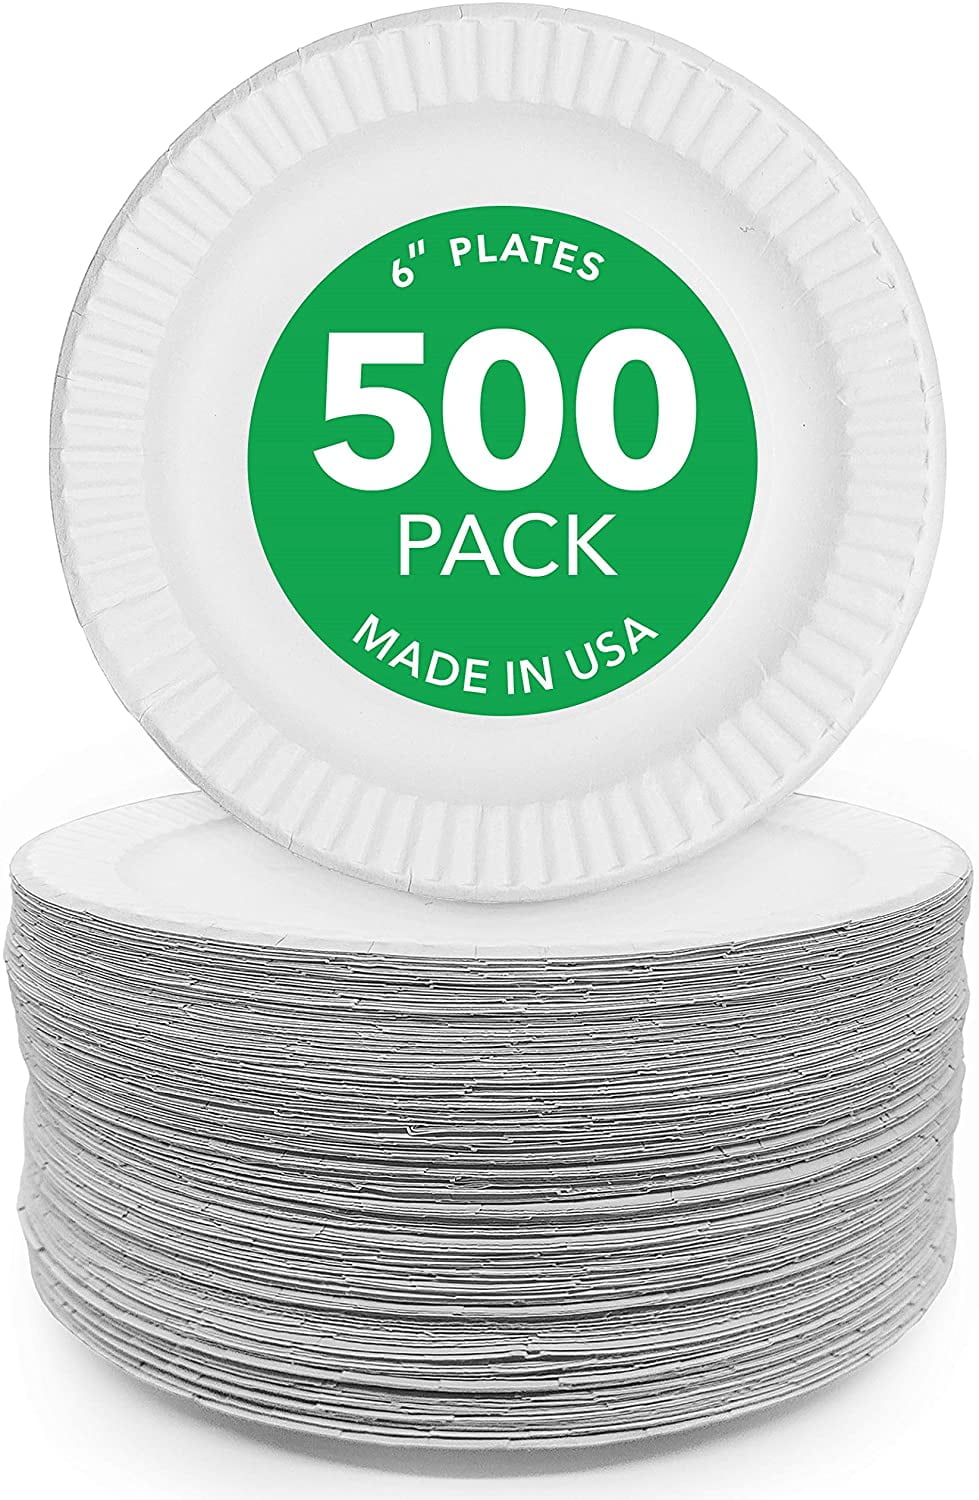 Stock Your Home 6-Inch Paper Plates Uncoated, Everyday Disposable